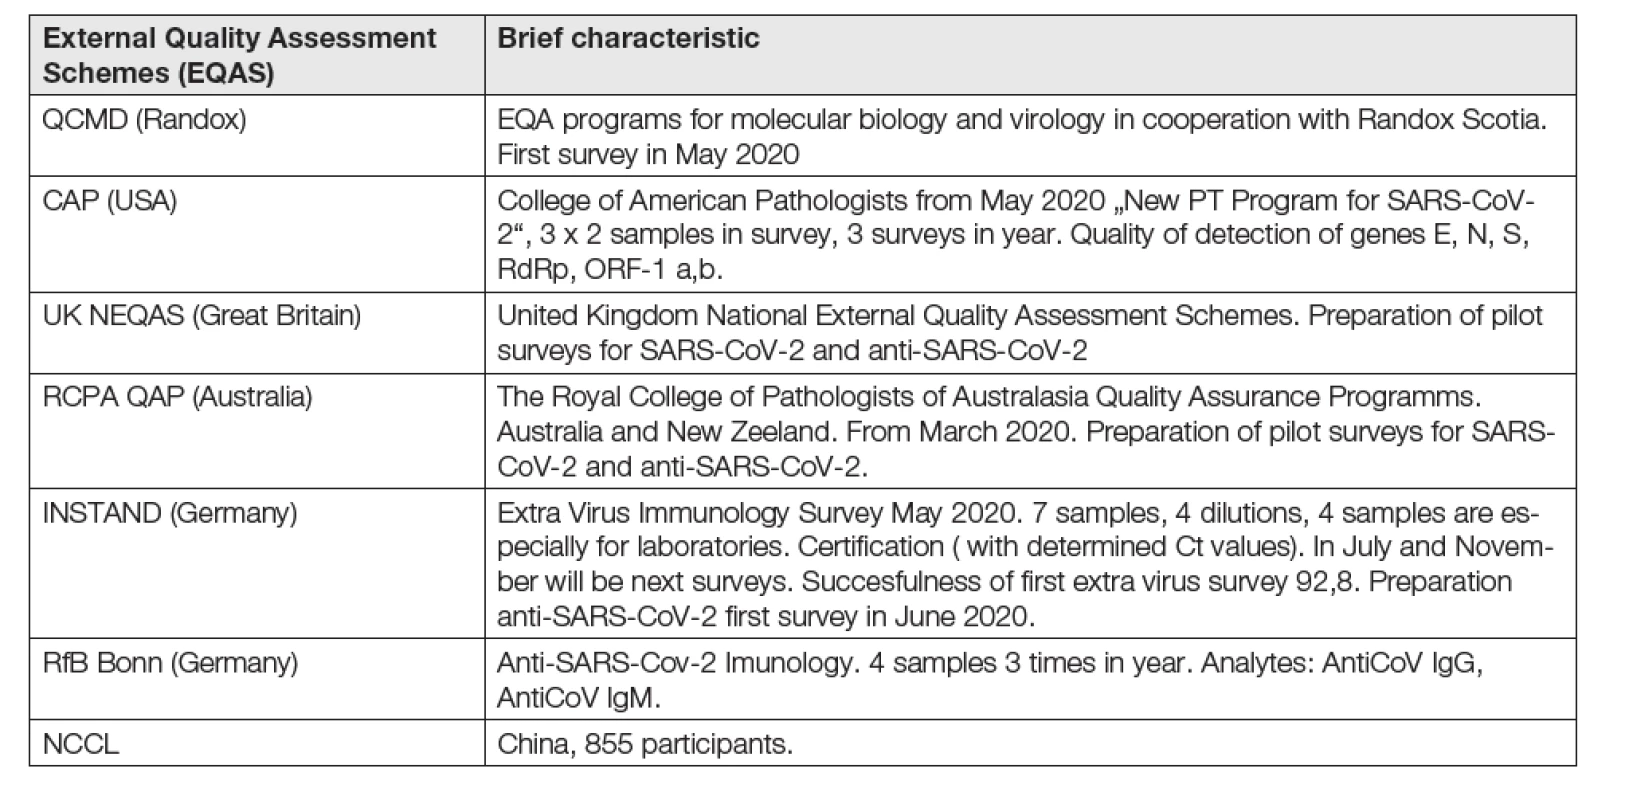 Some external quality assessment schemes for SARS-CoV-2 to Juni 1, 2020